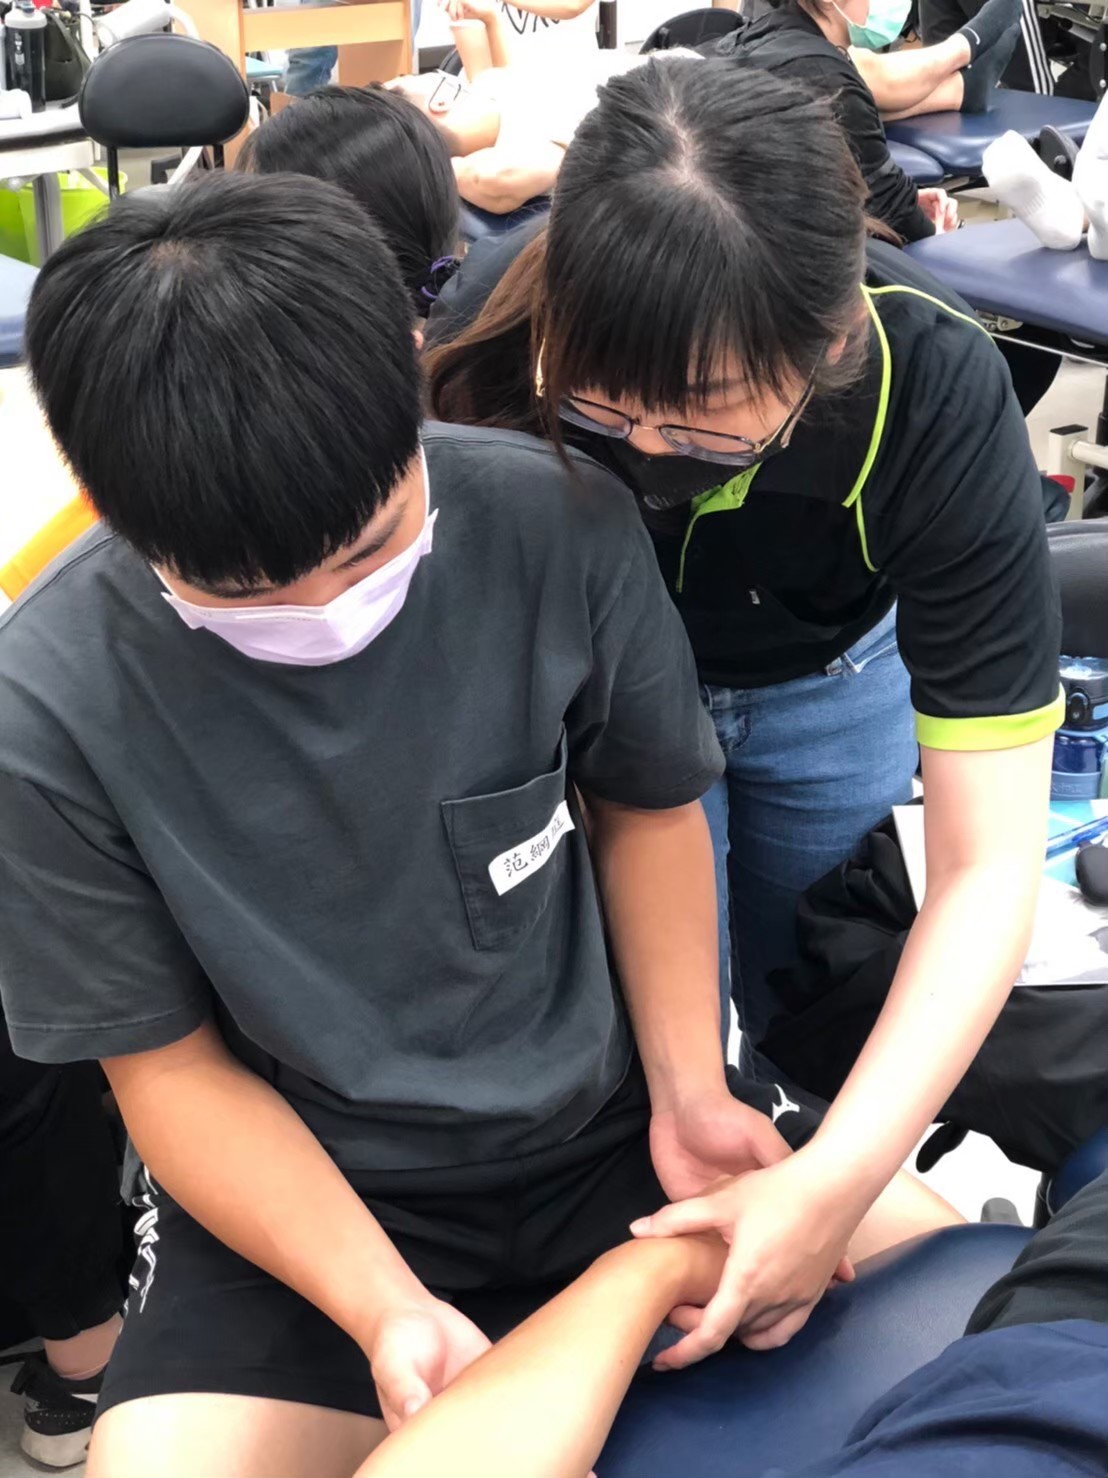 The first graduates from the Department of Physical Therapy of Asia University achieved a high pass rate in the physical therapist licensing examination. The image shows mentors guiding students through the process of physical therapy procedures